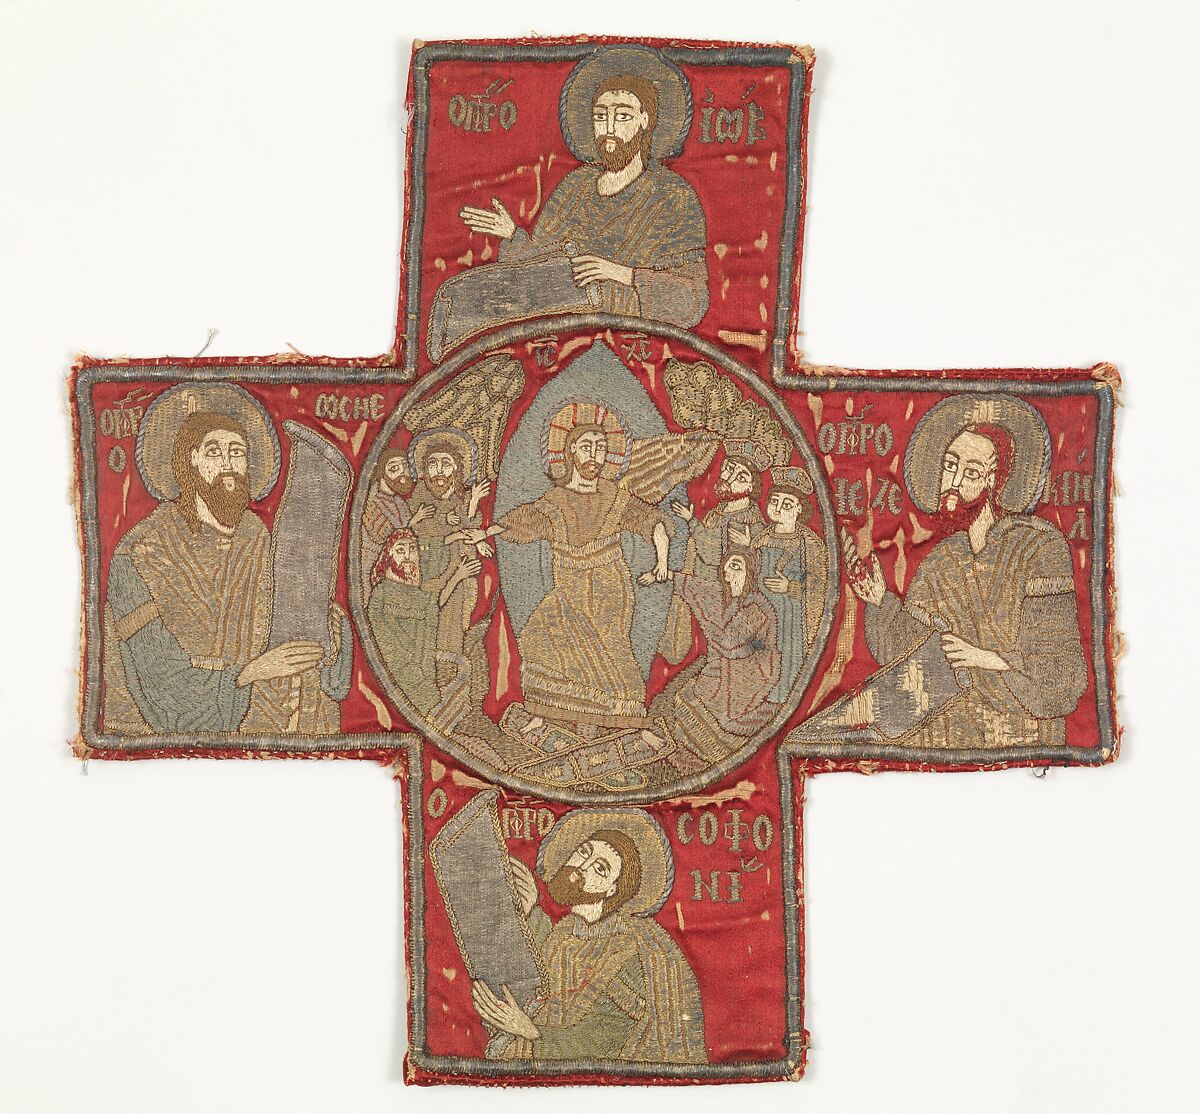 Embroidered cross from an Omophorion, Silk and metal thread embroidery on foundation of silk satin backed with cotton plain weave, Greek or Romanian 